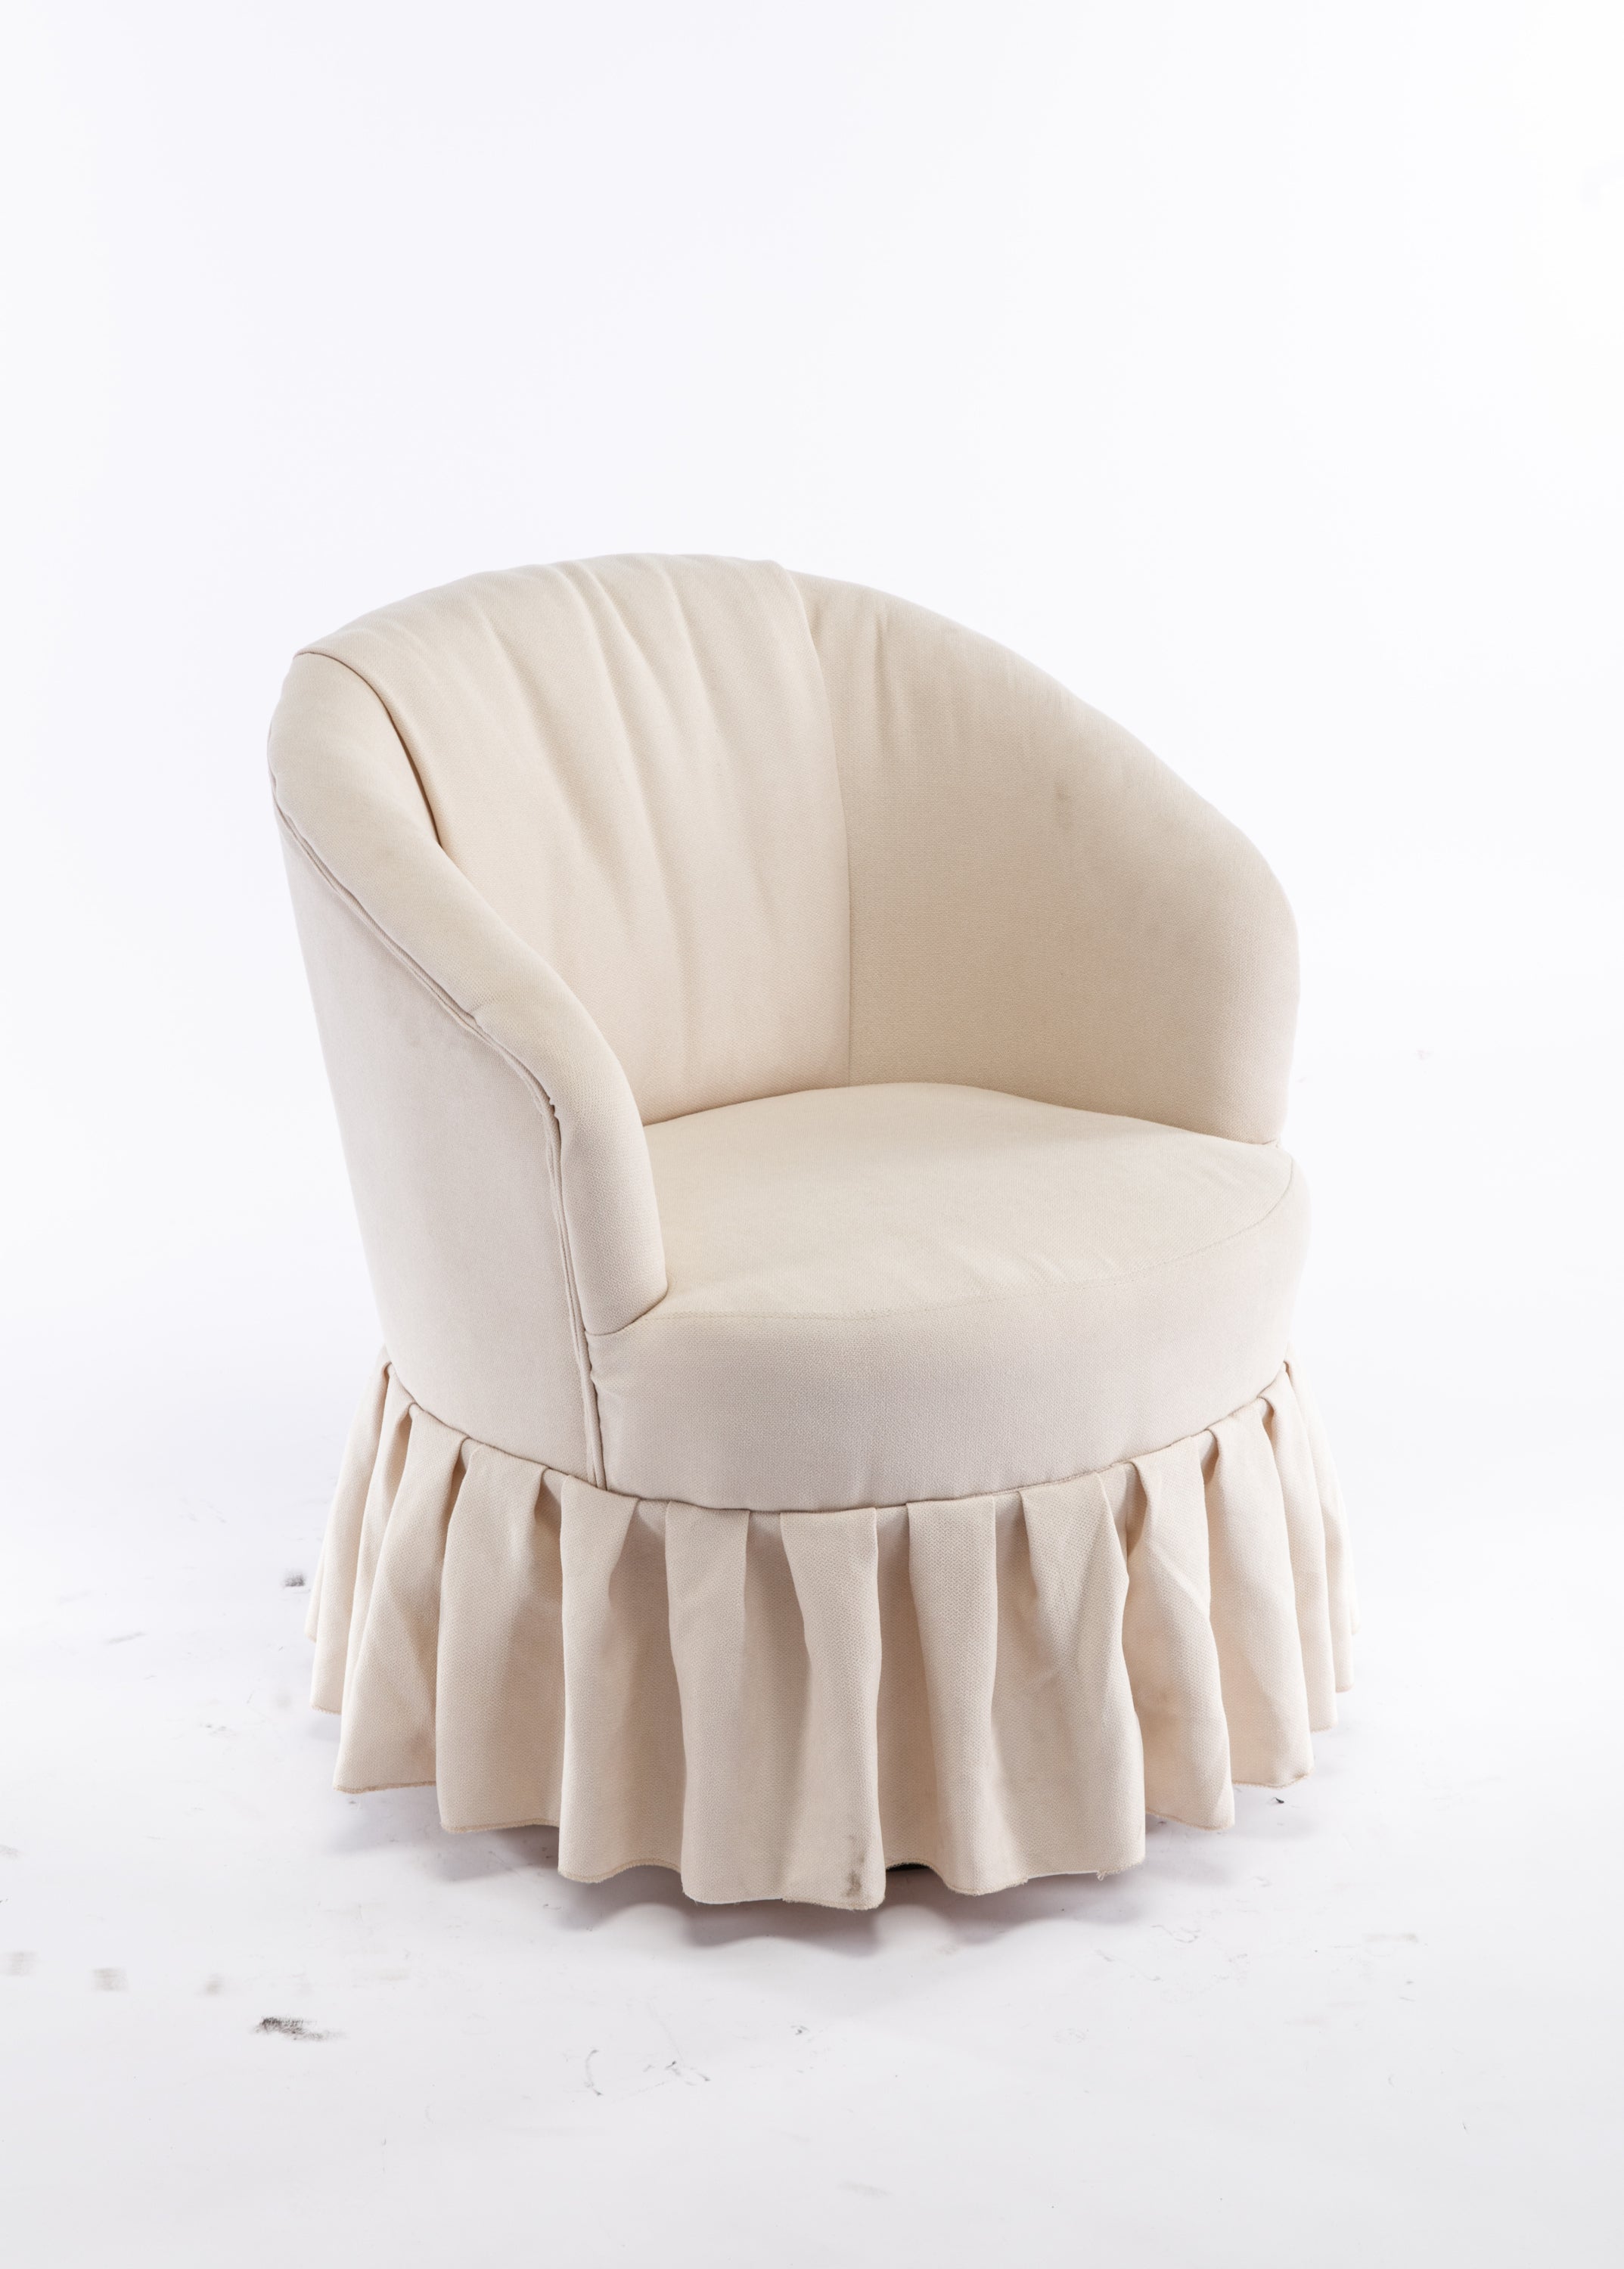 Linen Fabric Accent Swivel Chair Auditorium Chair With Pleated Skirt - Beige